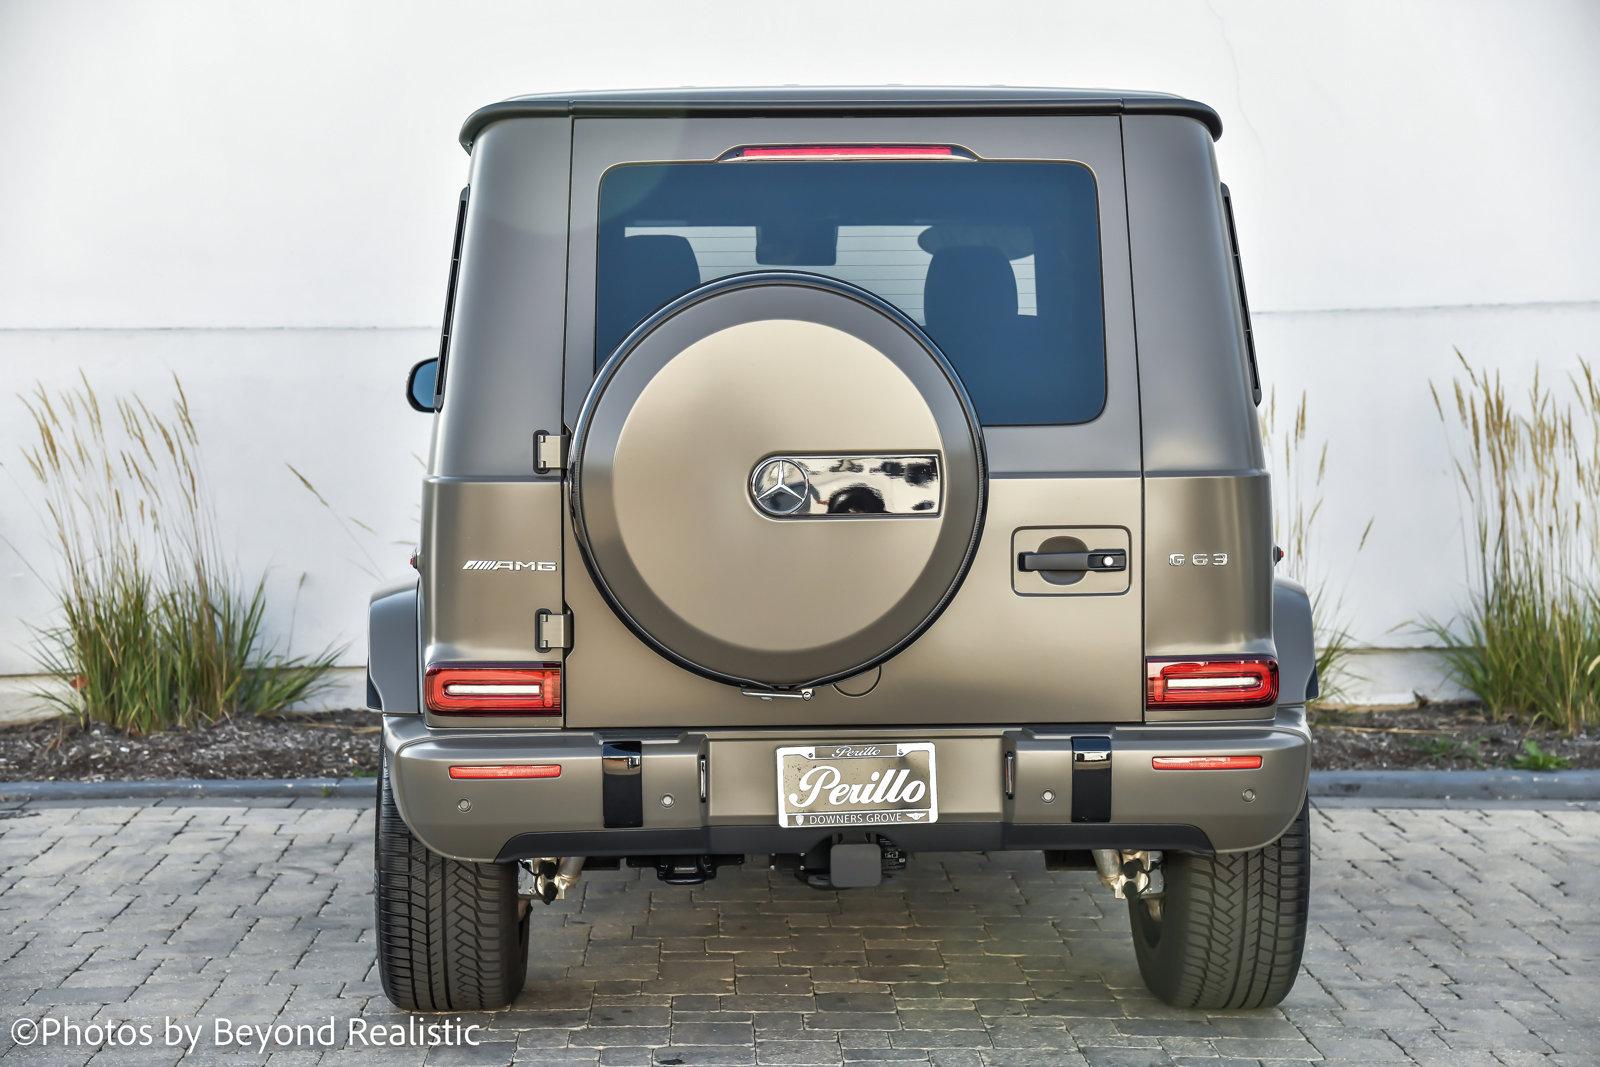 Used 2020 Mercedes-Benz G-Class AMG G 63, Rear Ent. | Downers Grove, IL